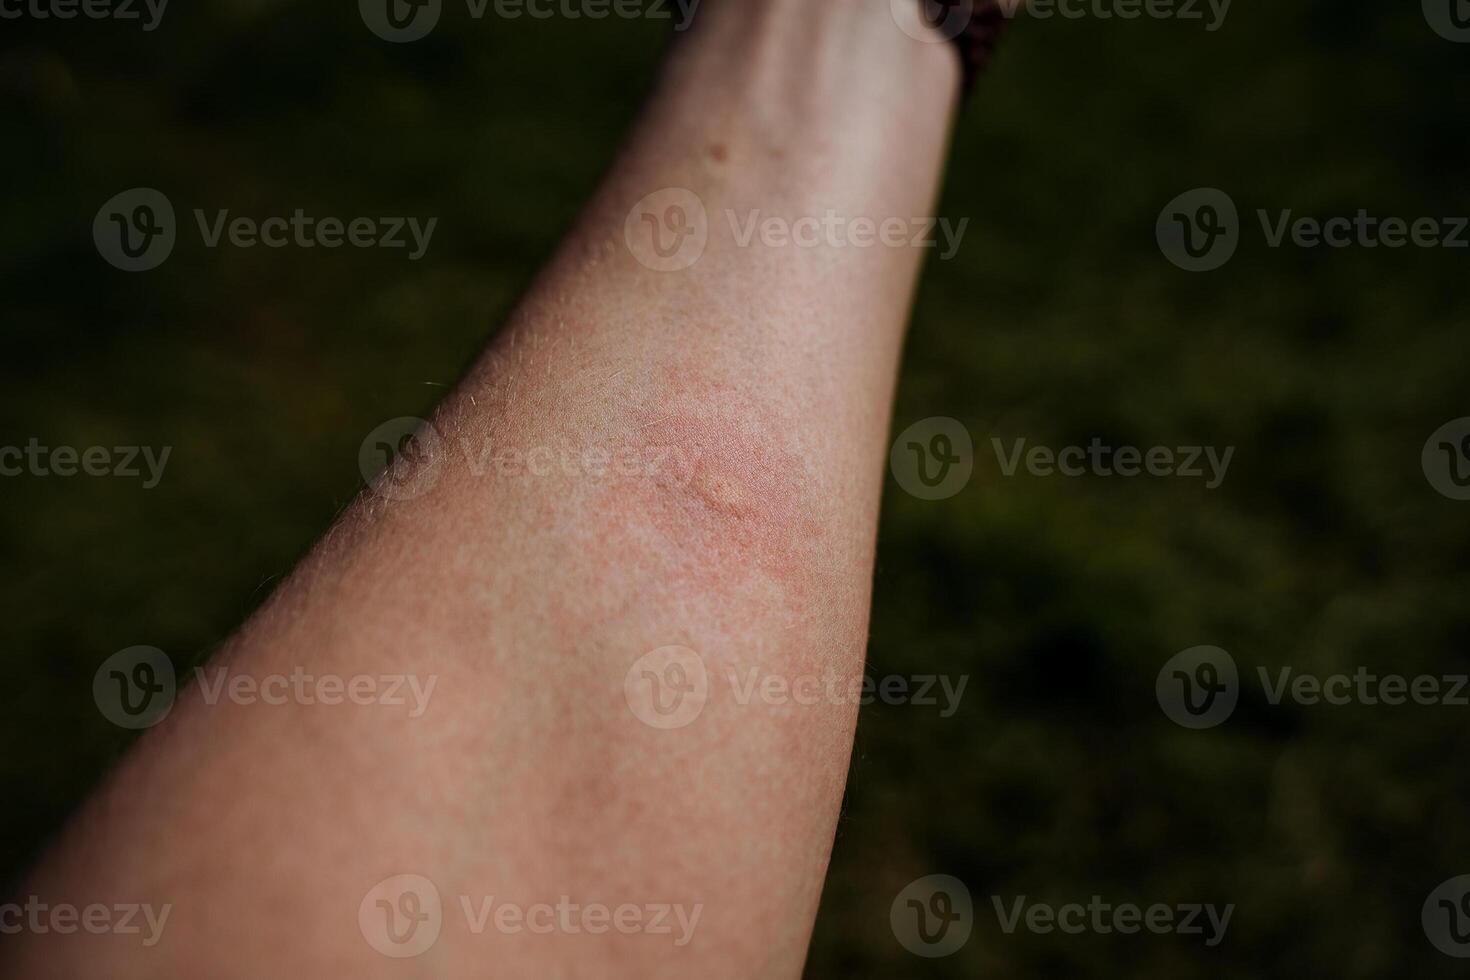 A blister mark from a midge bite on the human body, a red spot from a mosquito bite, reddening of the skin, itching on the body. photo